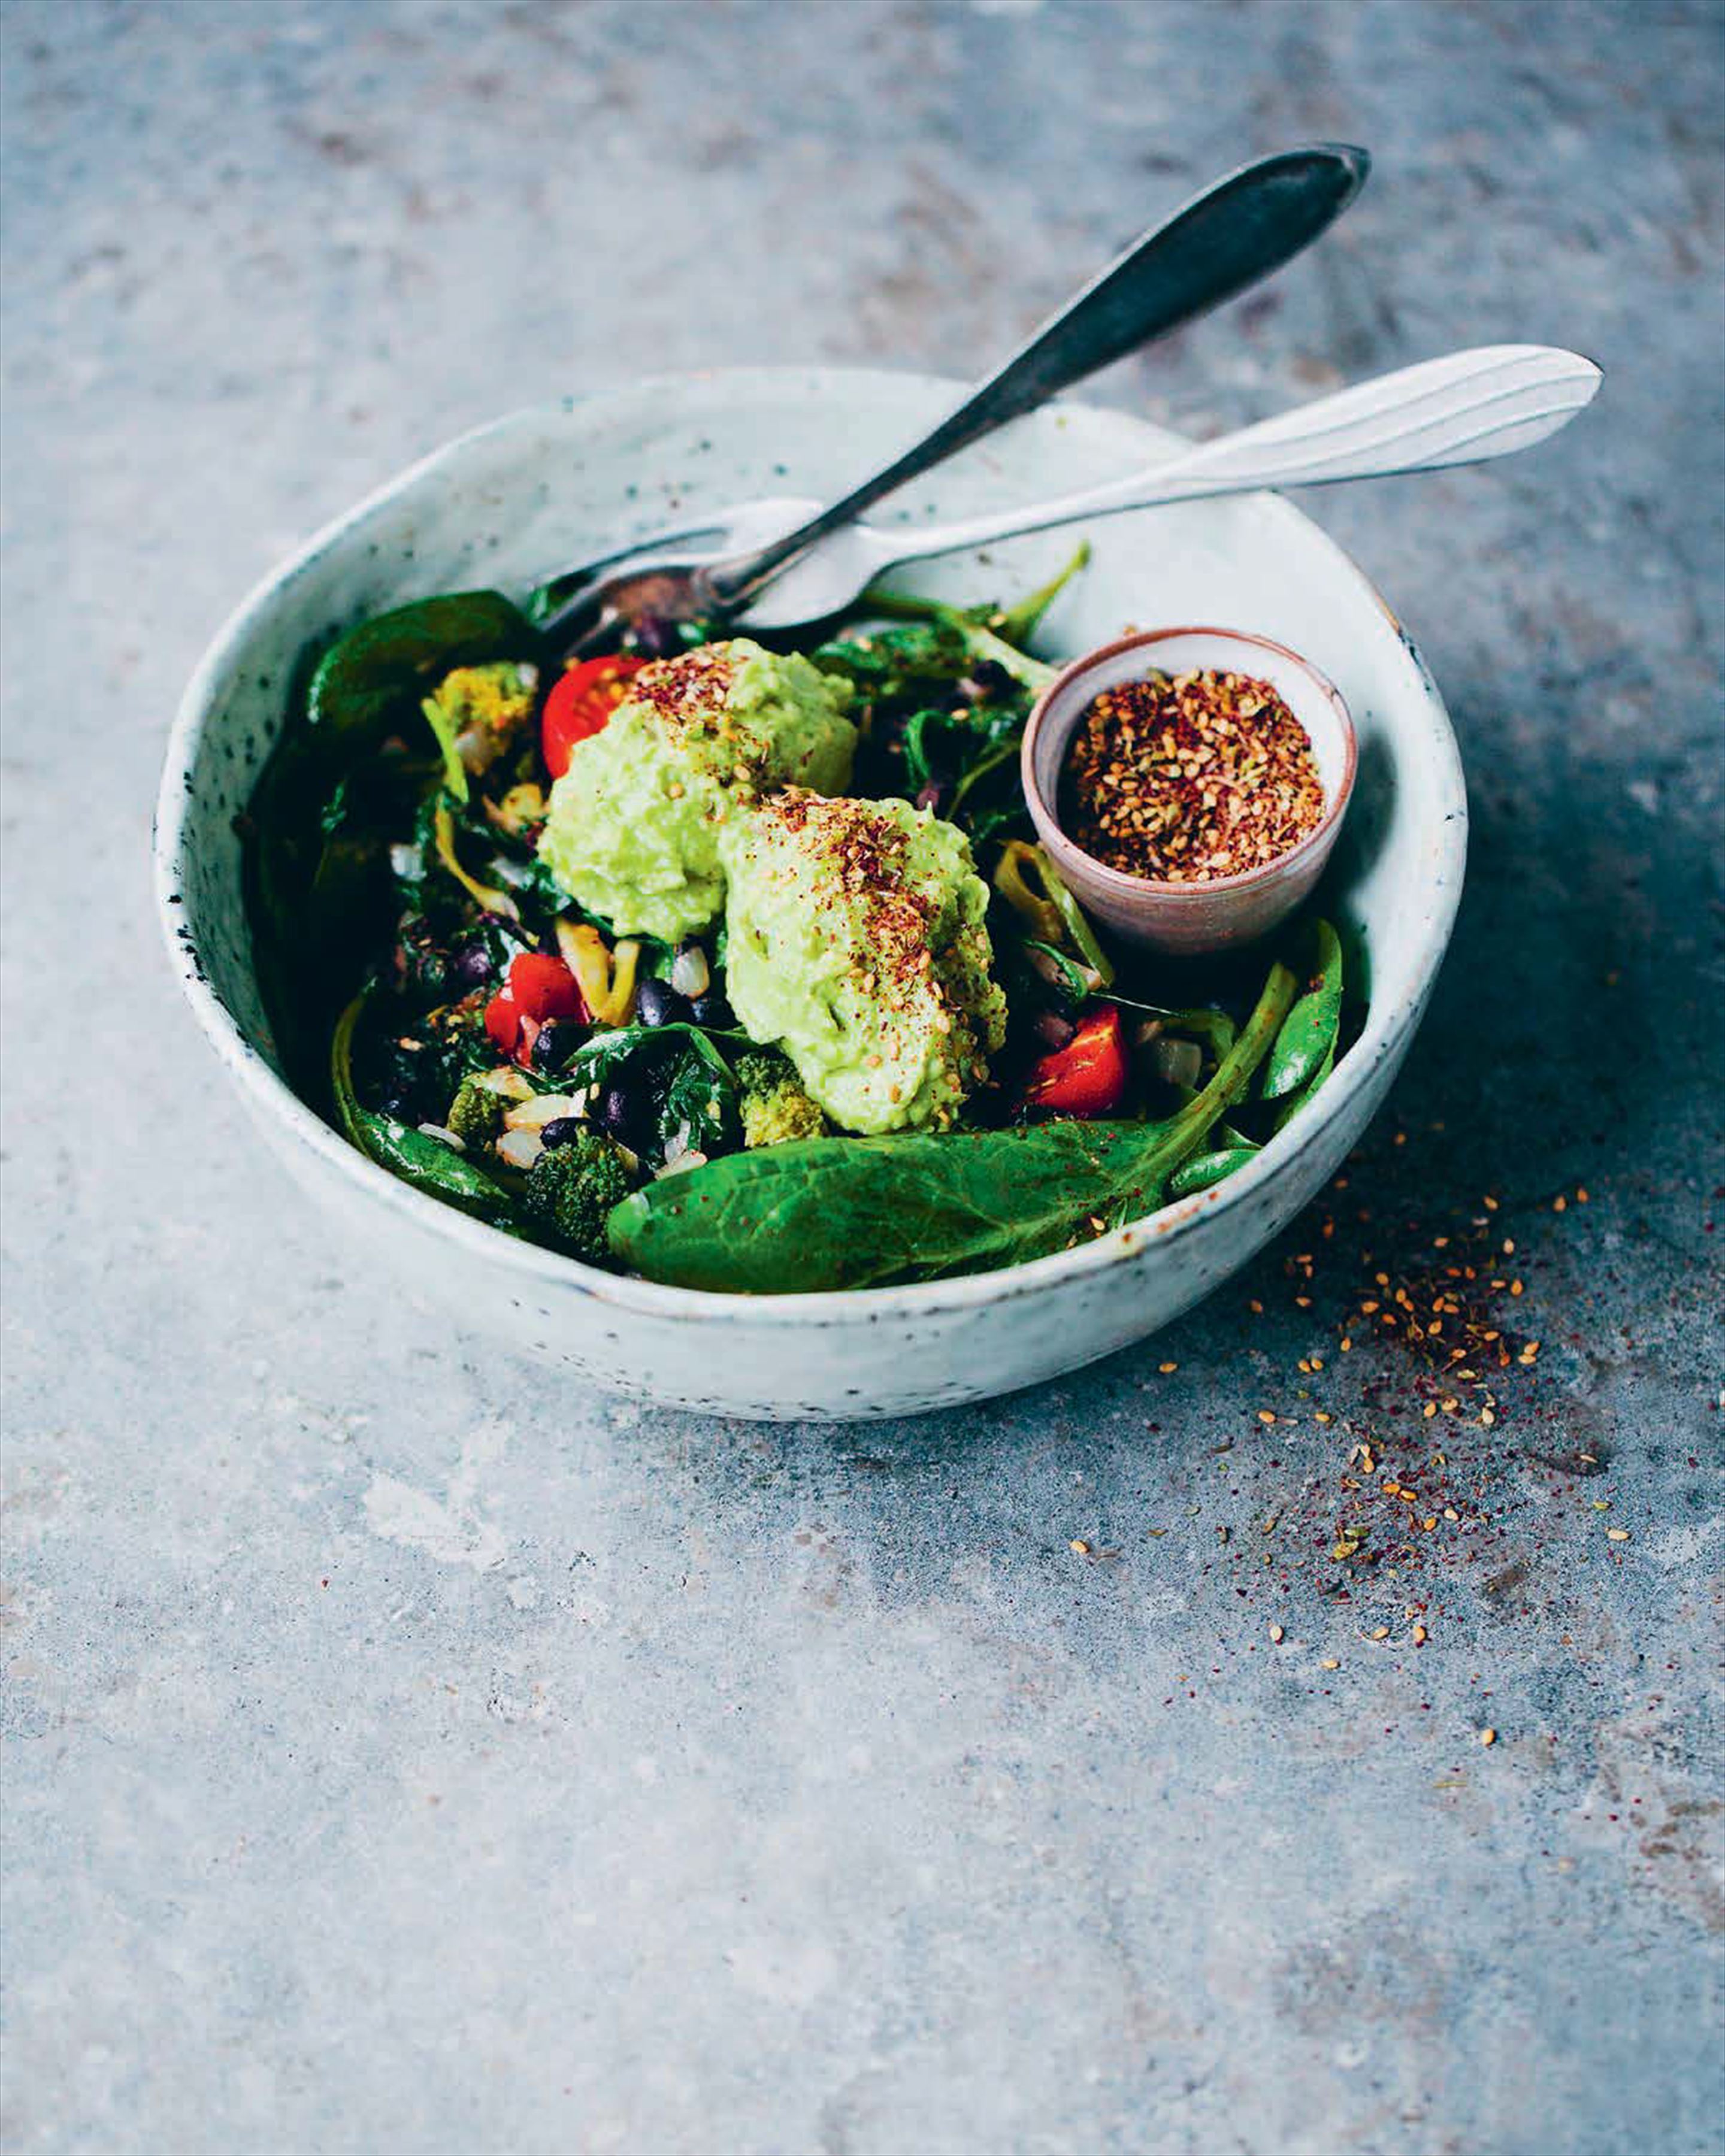 Warm black beans and greens with avo and za’atar